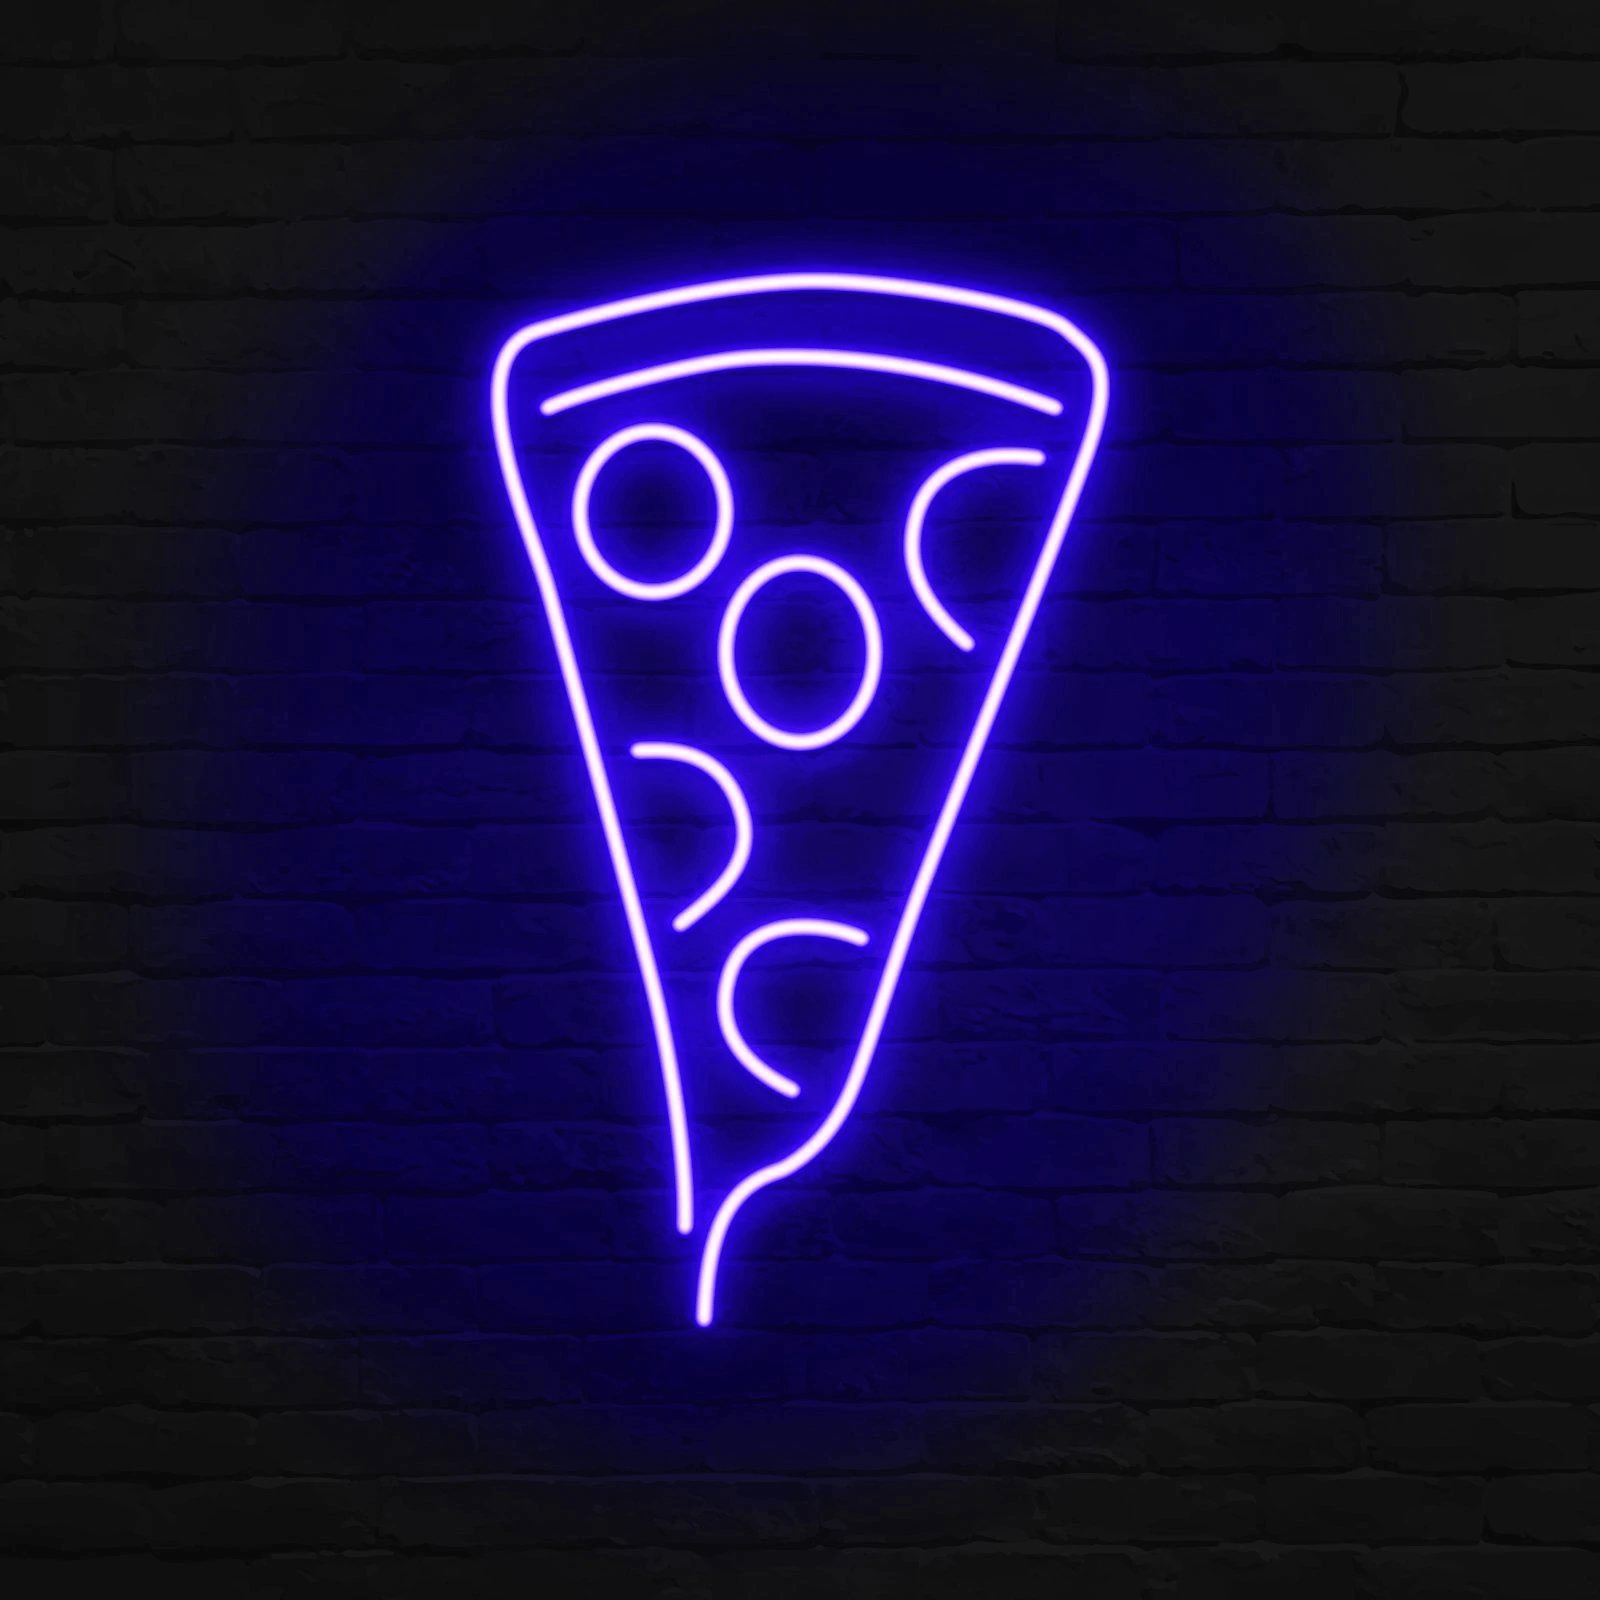 A neon sign of a slice of pizza - Neon blue